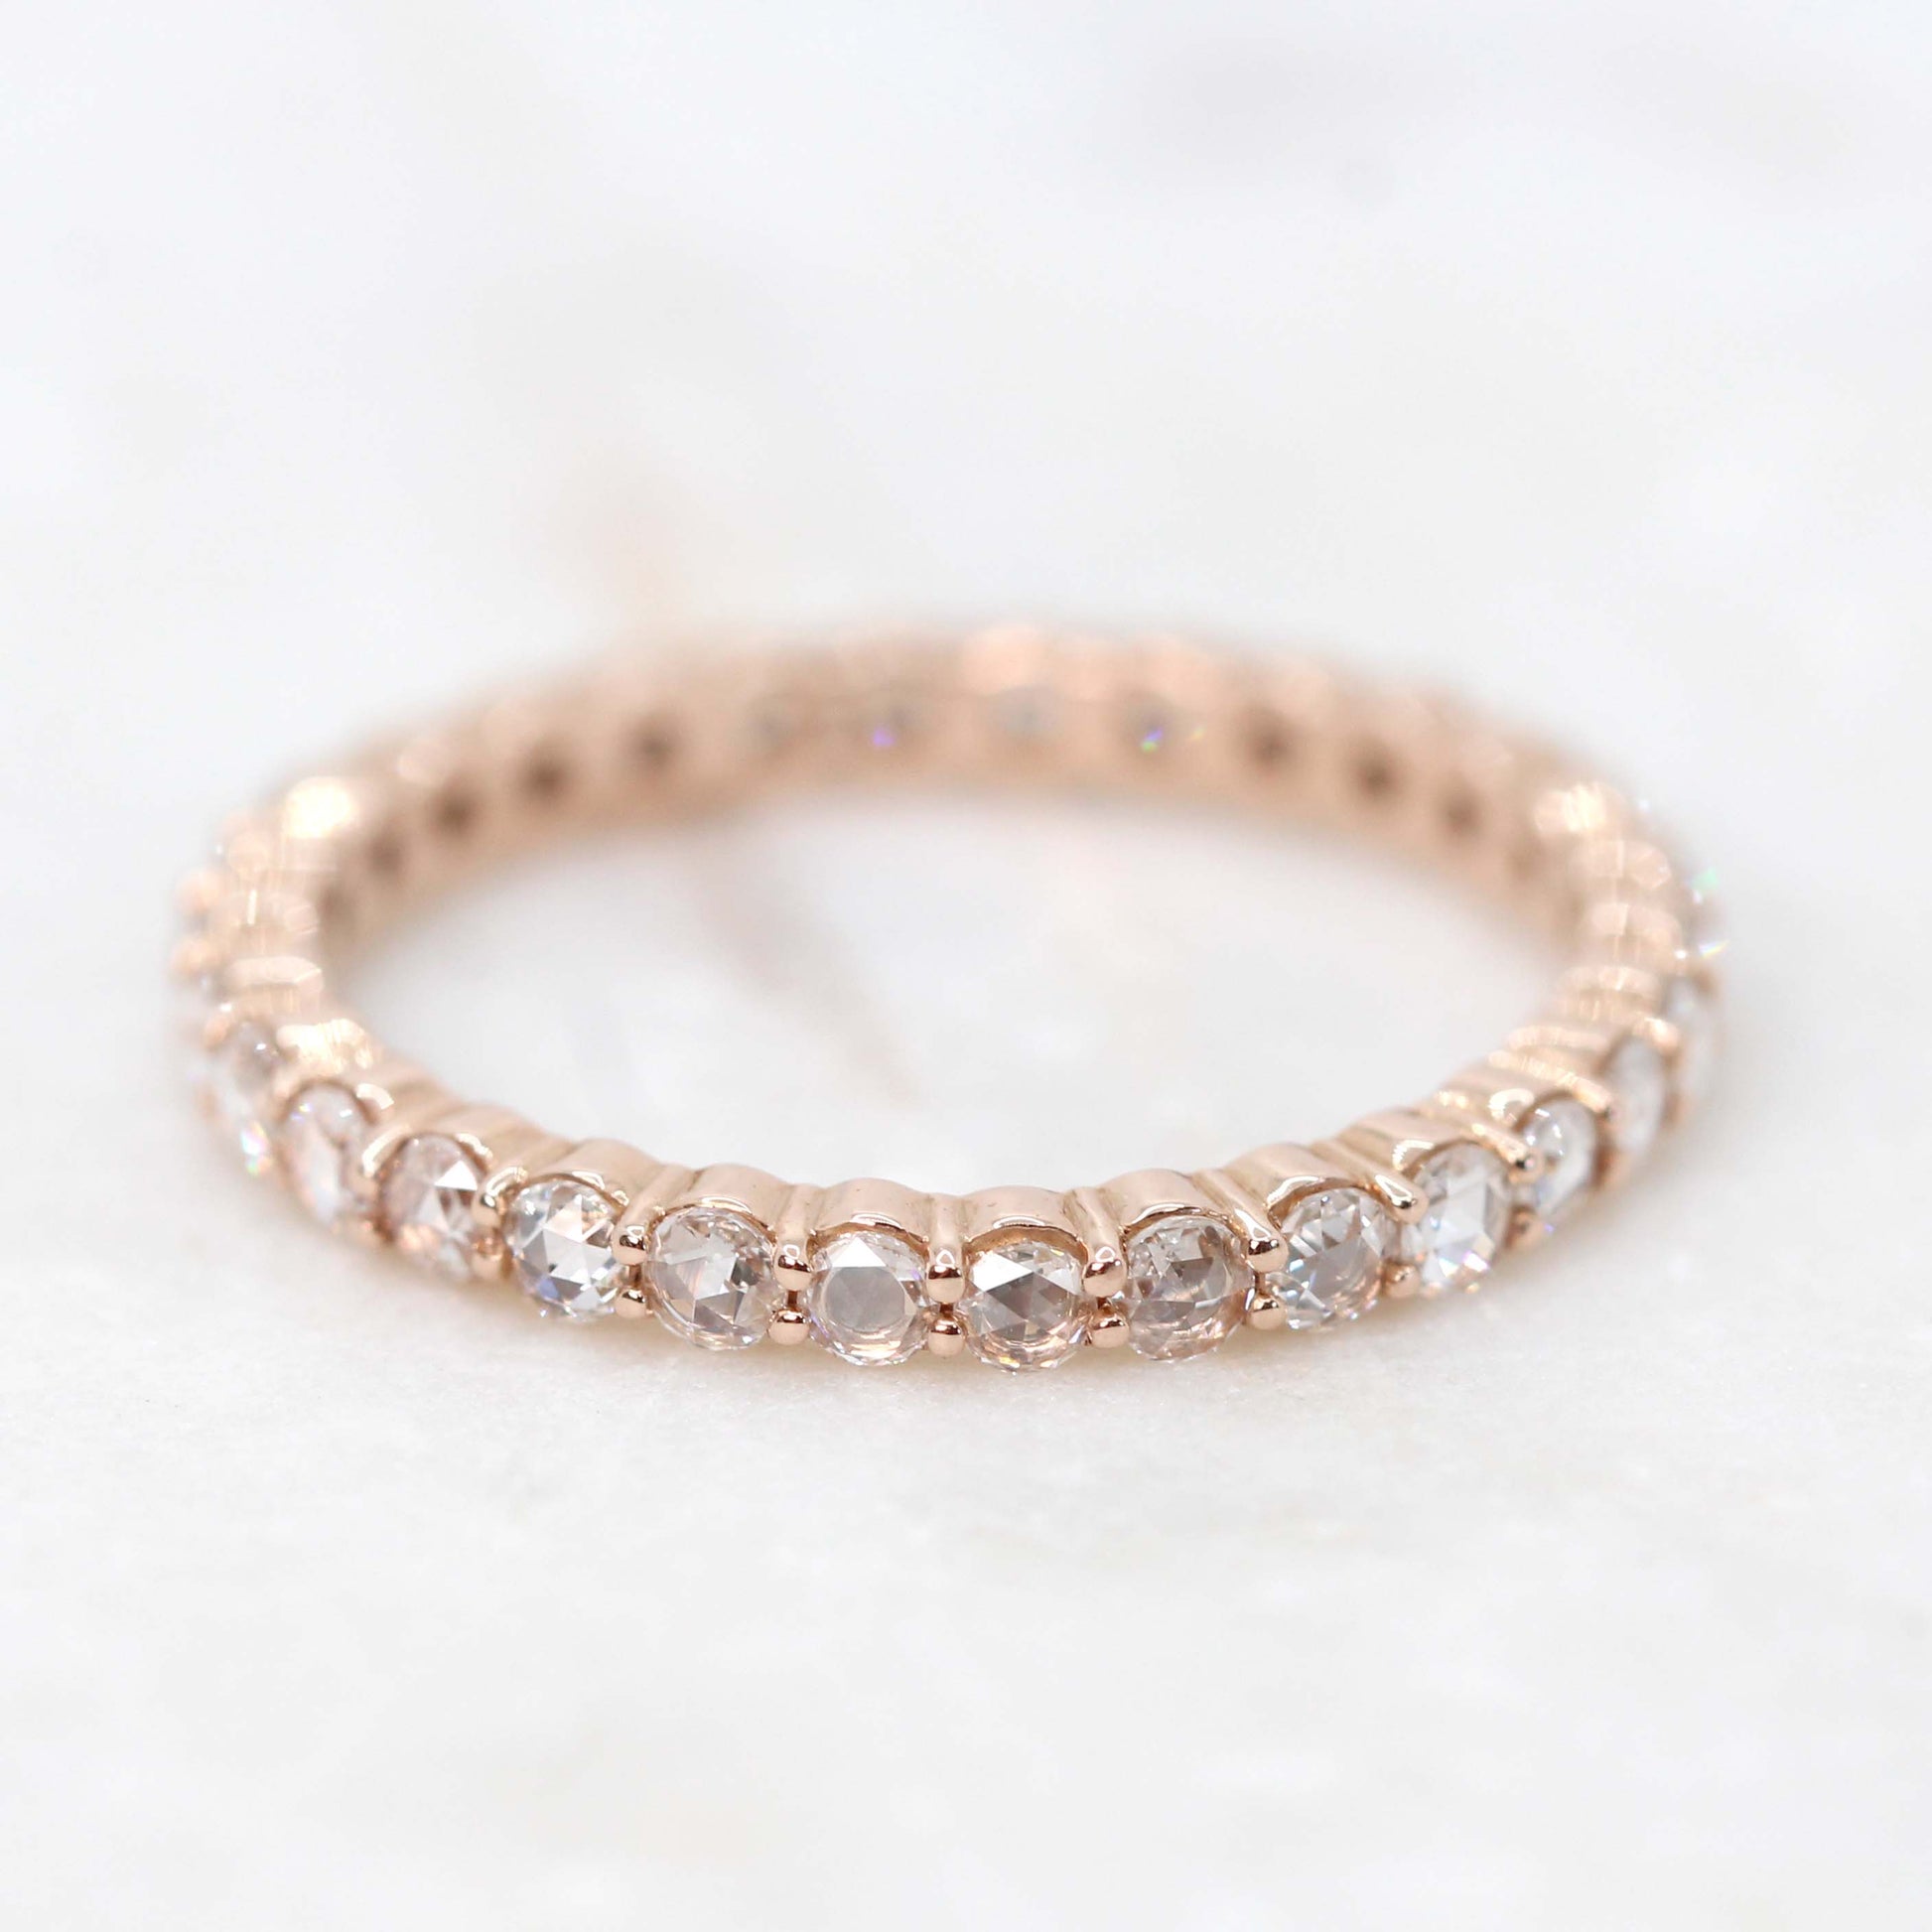 CAELEN (M) Paige - Diamond Stackable Wedding Band in Your Choice of Gold - Midwinter Co. Alternative Bridal Rings and Modern Fine Jewelry